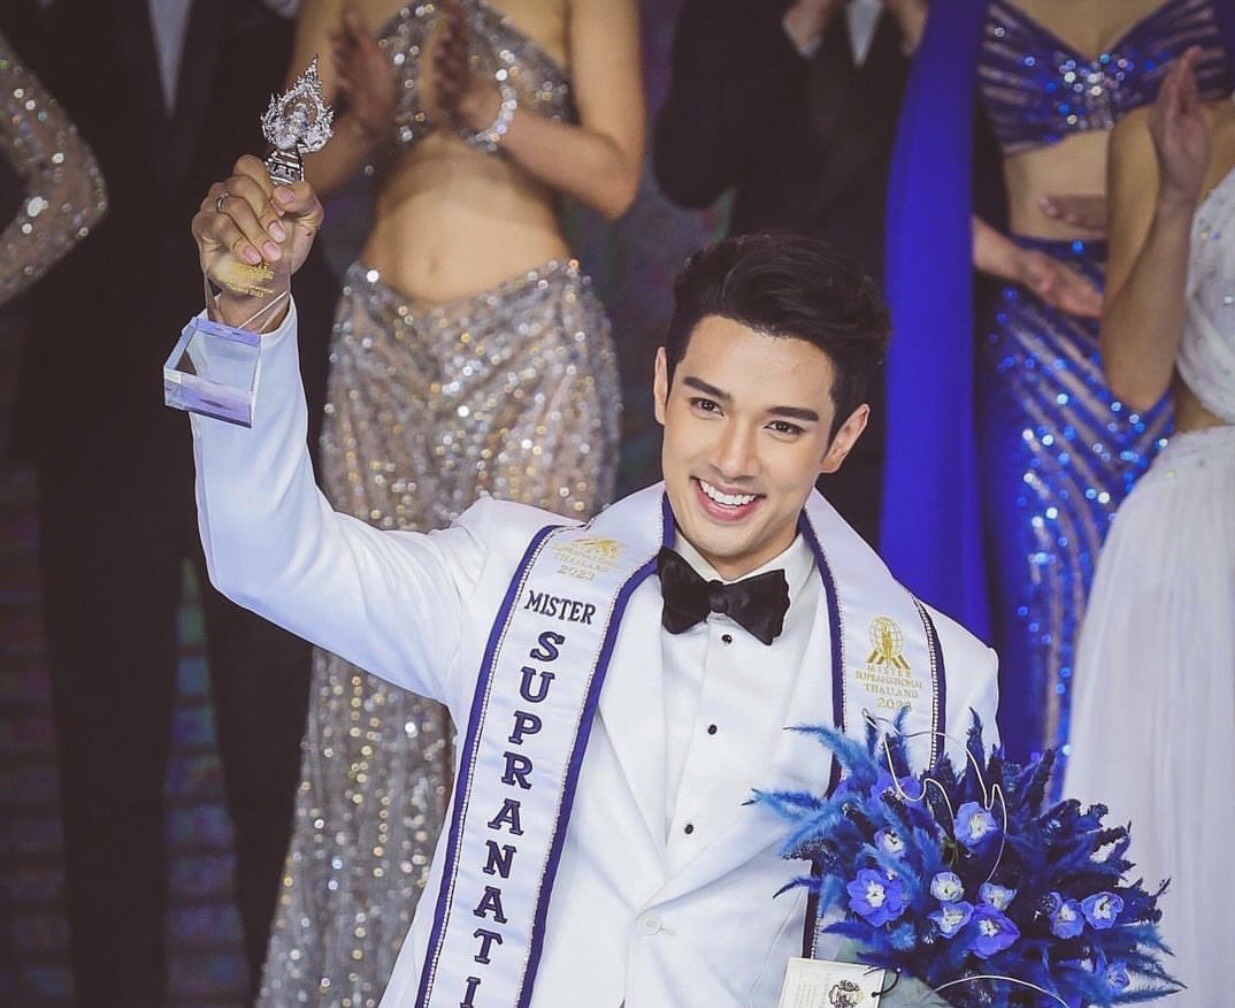 The fascinating beauty of Mister Supranational Thailand 2023